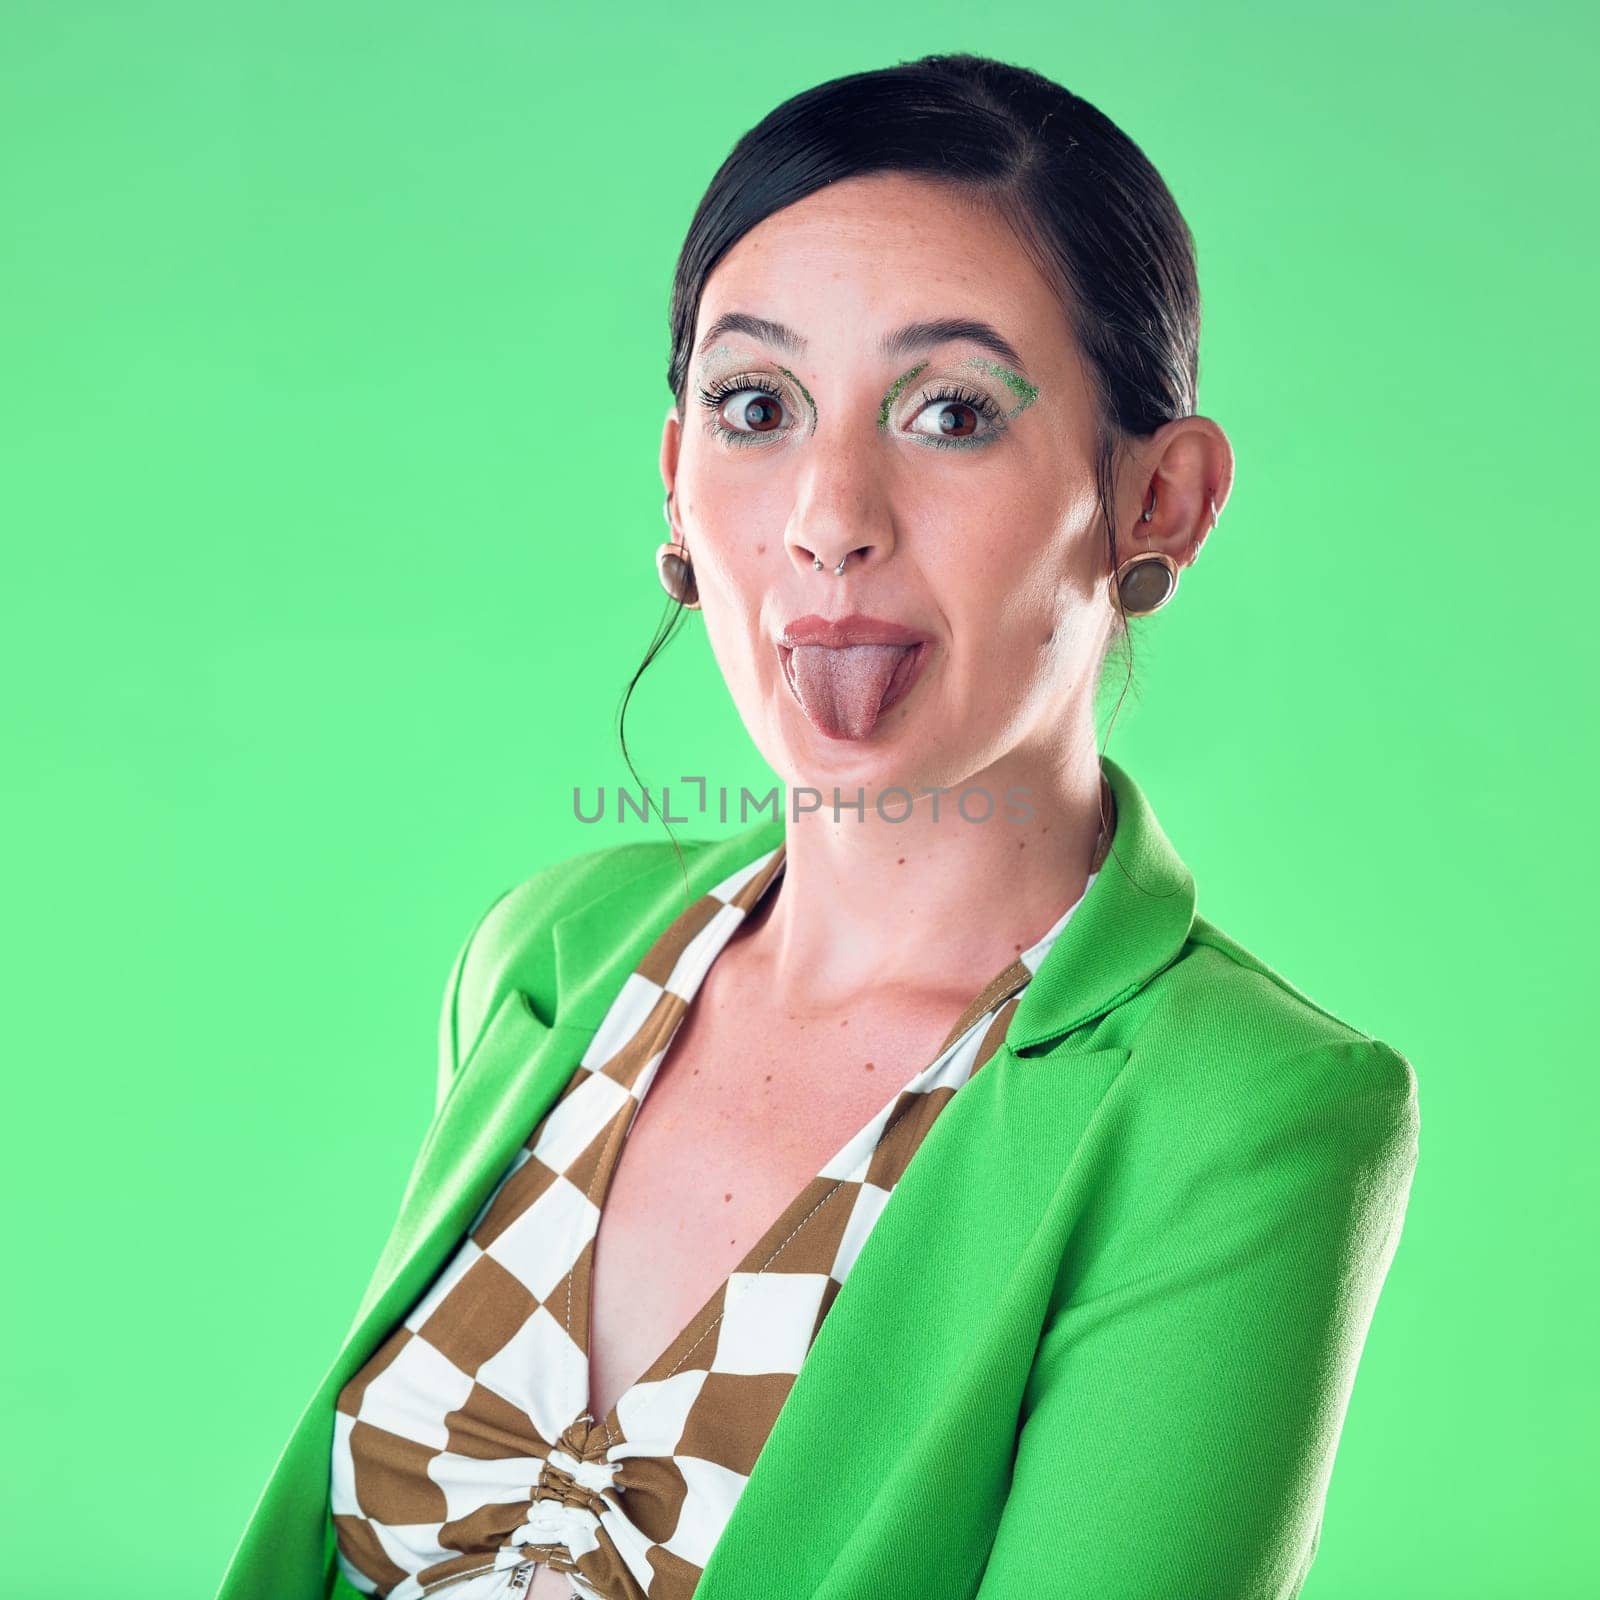 Portrait, fashion and woman with tongue out in studio isolated on a green background. Comic face, funny and gen z female model with makeup, cosmetics or beauty aesthetics, trendy or stylish suit